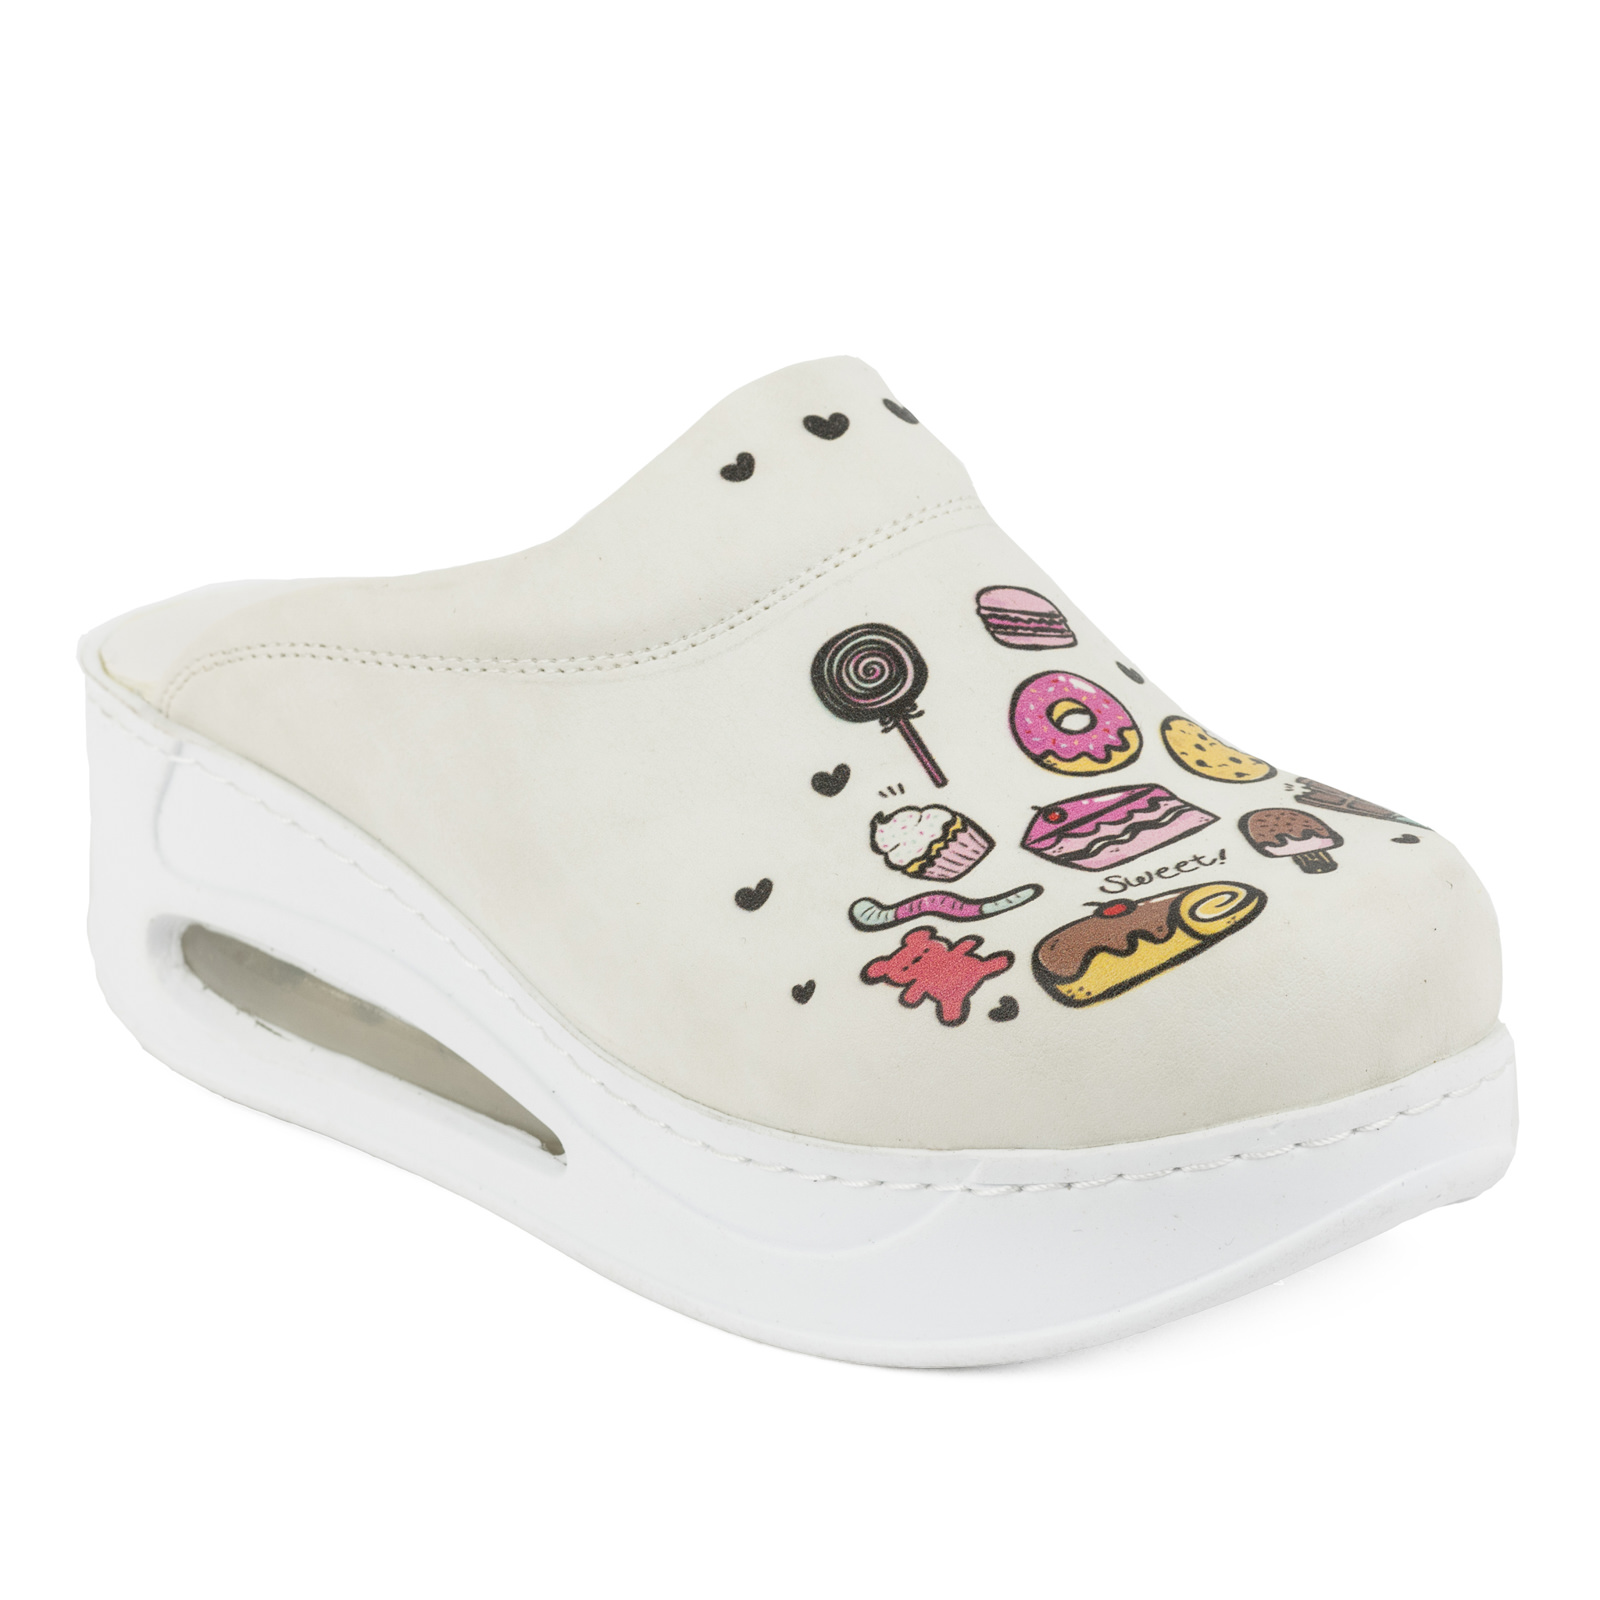 Patterned women clogs A104 - SWEET AIR - WHITE